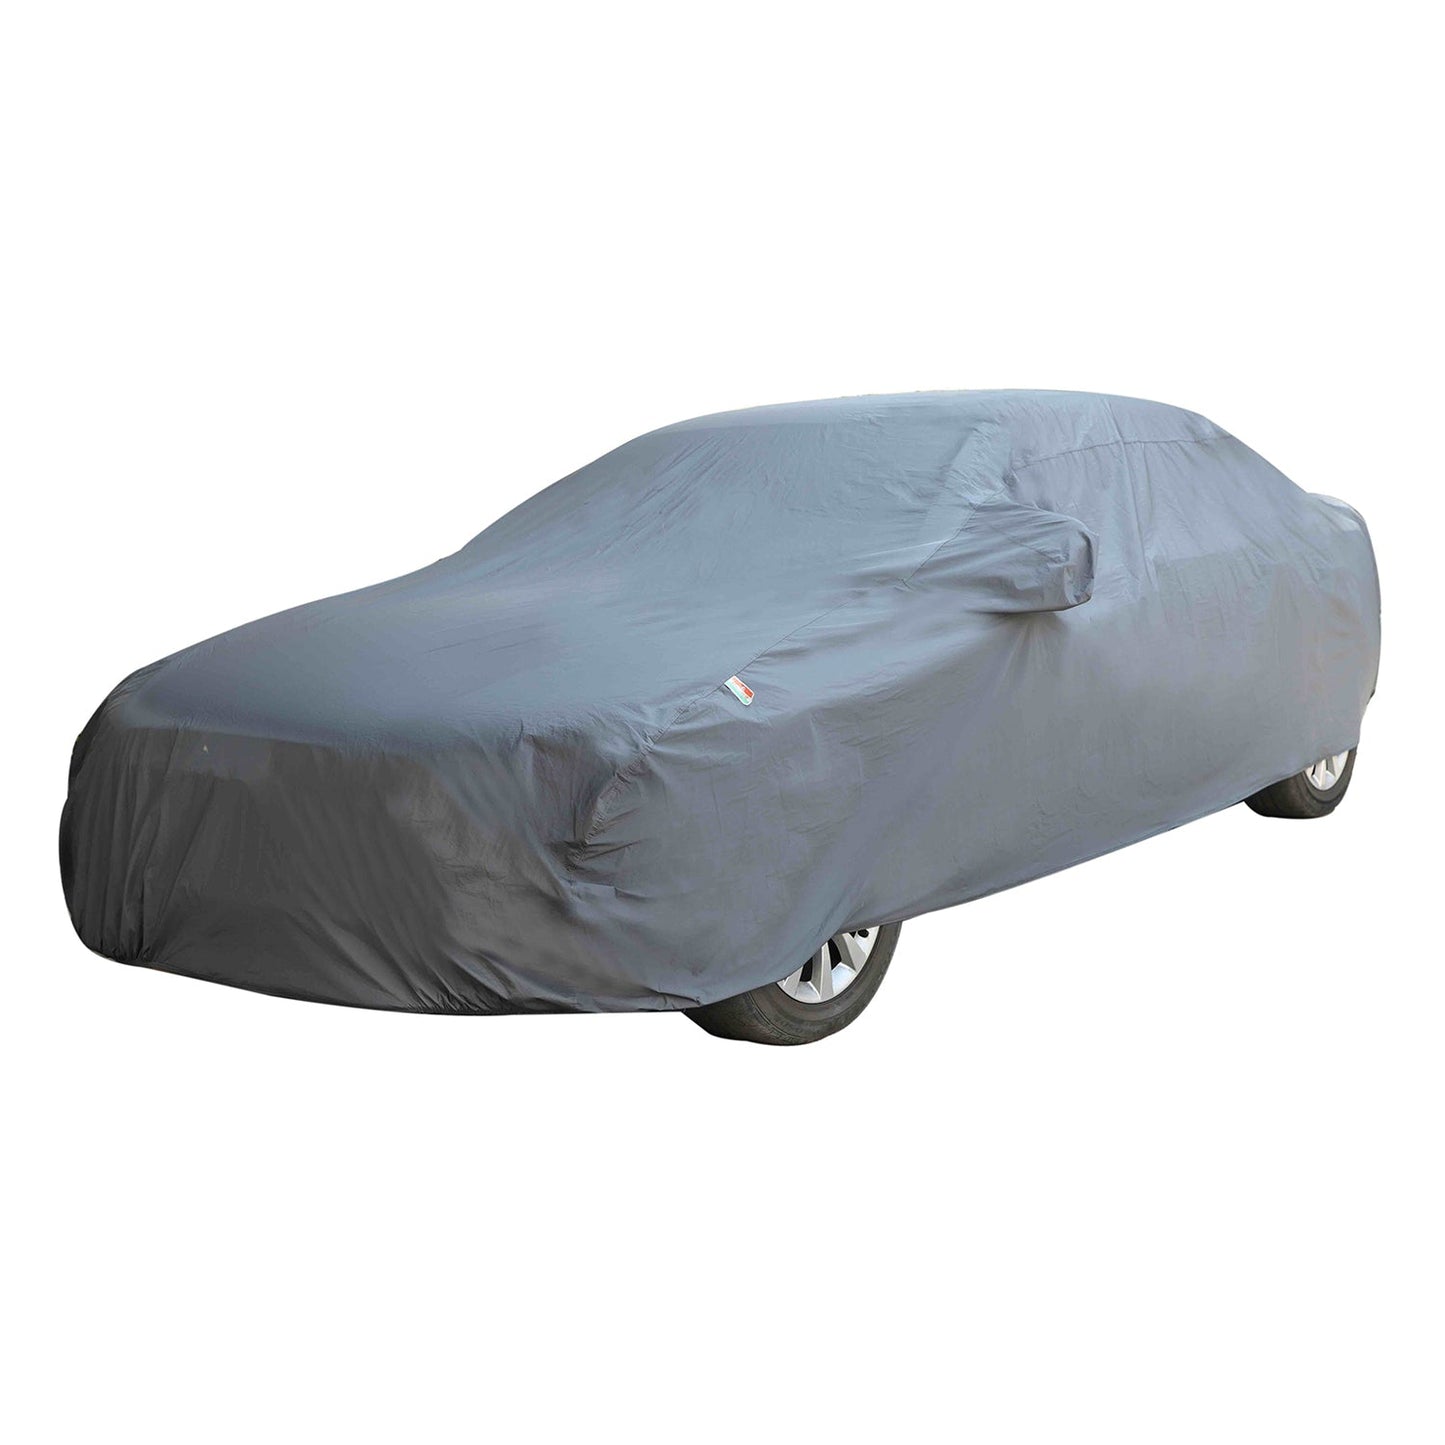 Oshotto Dark Grey 100% Anti Reflective, dustproof and Water Proof Car Body Cover with Mirror Pockets For Mahindra Alturas G4